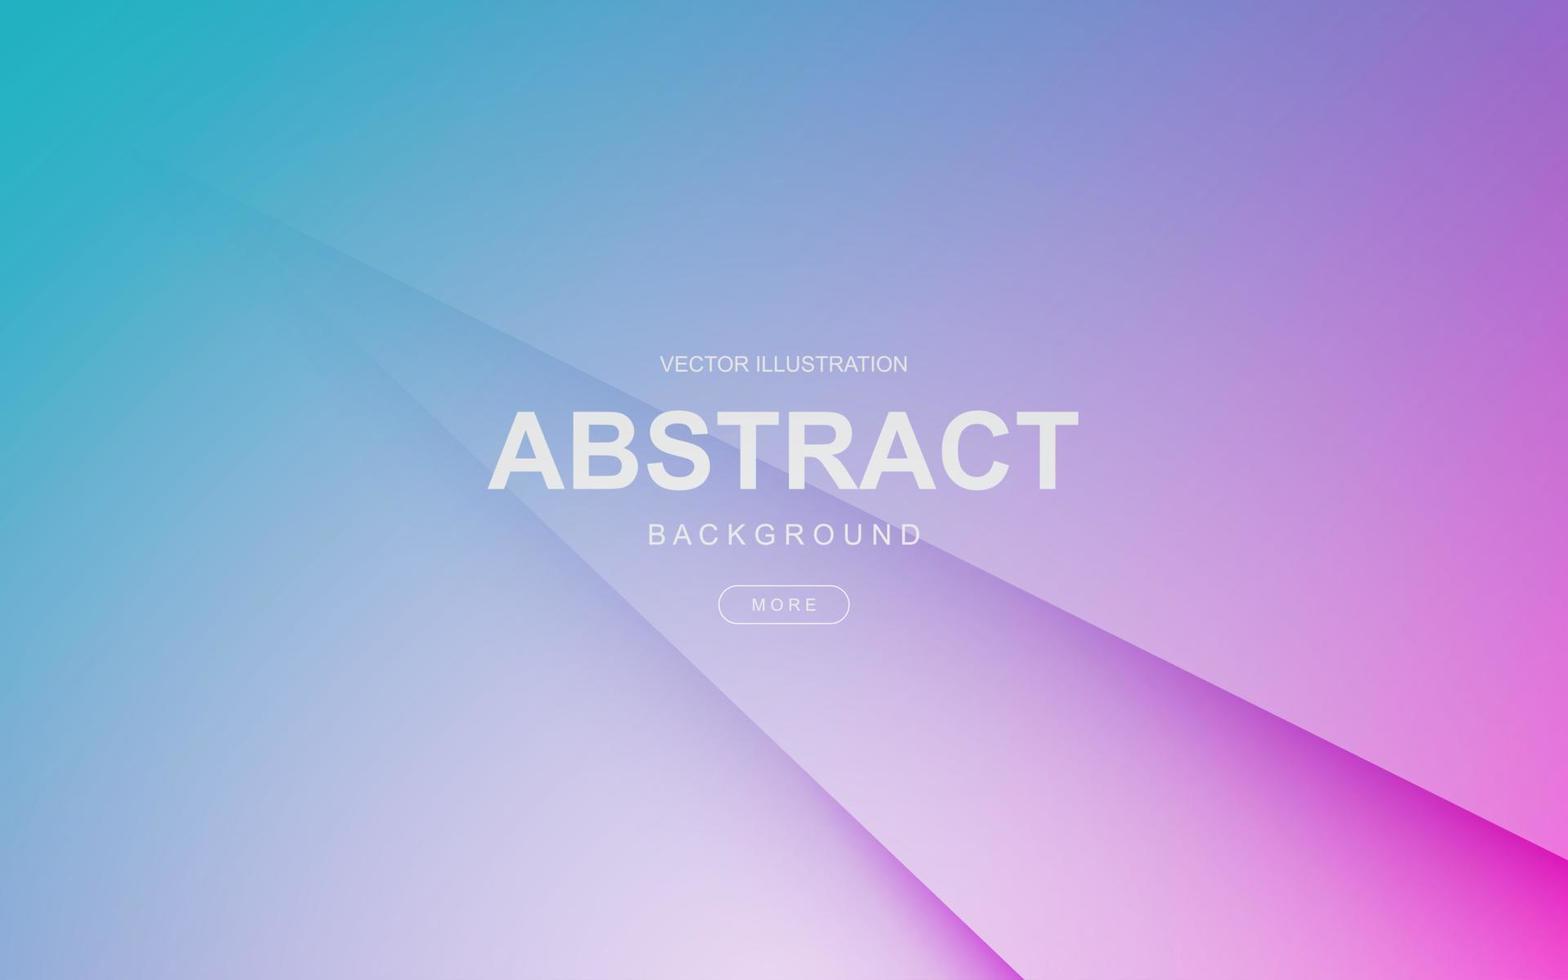 Modern abstract geometric design background vector